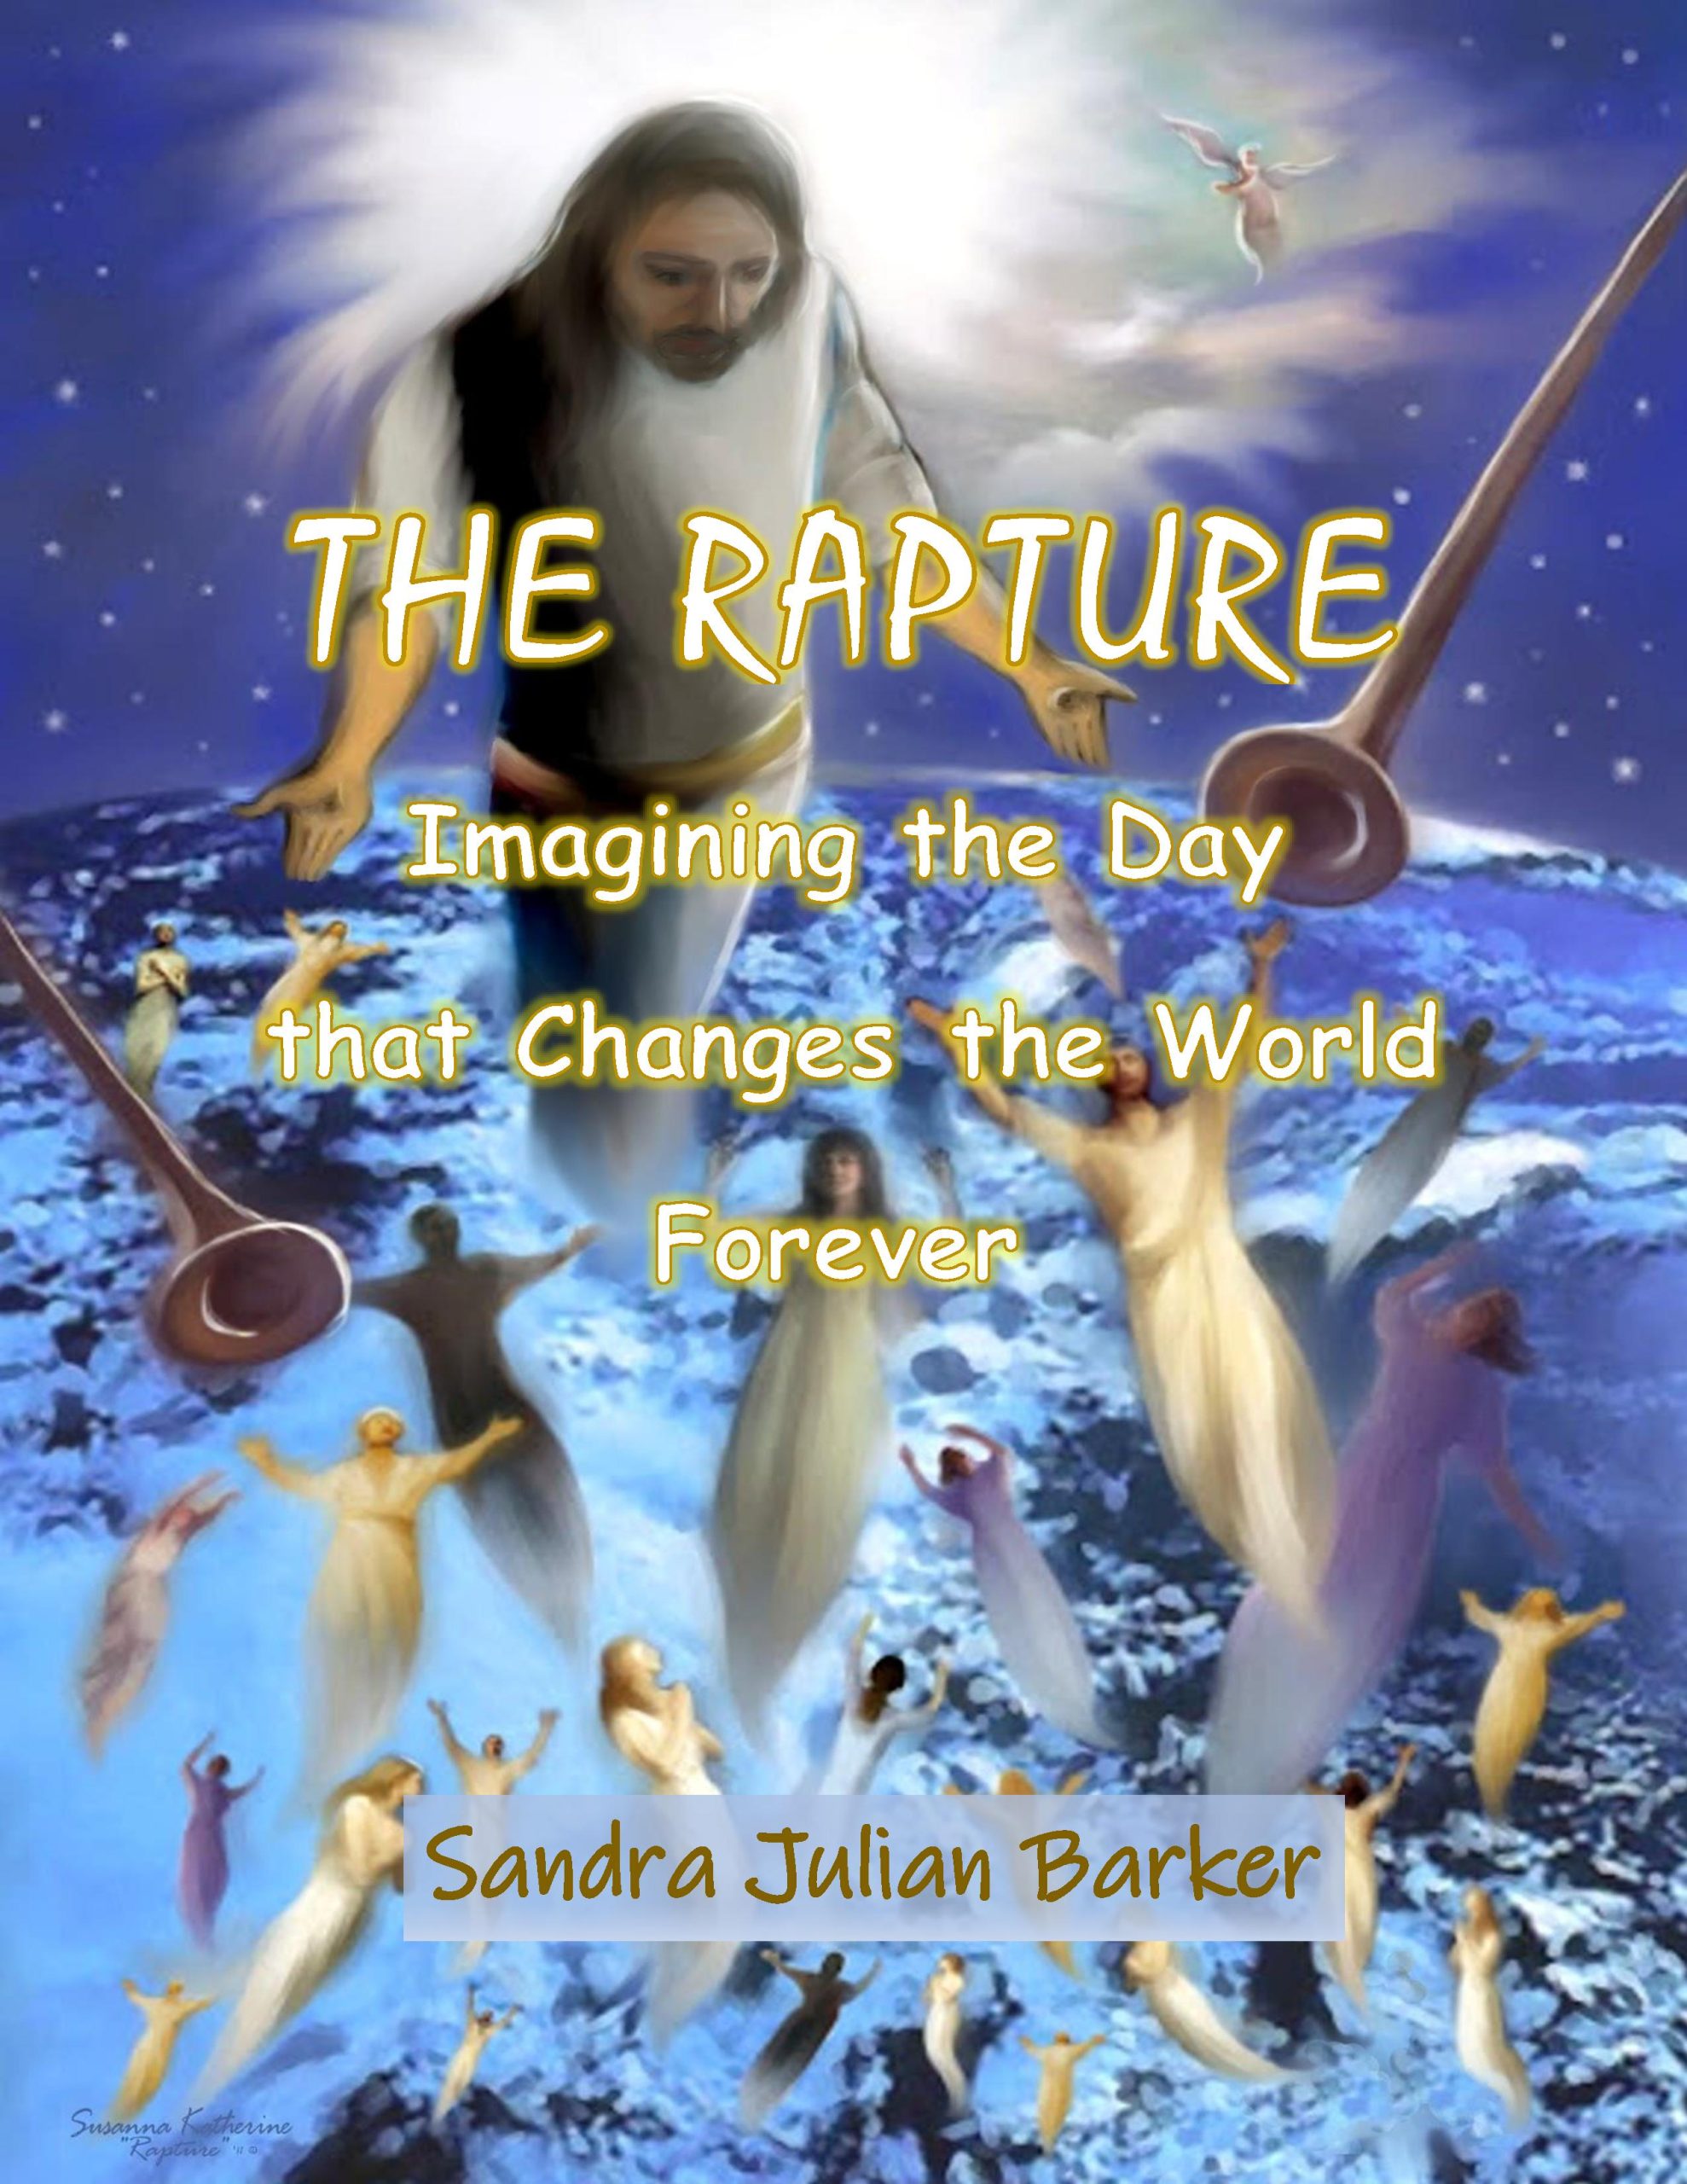 The Rapture: Imagining the Day that Changes the World Forever